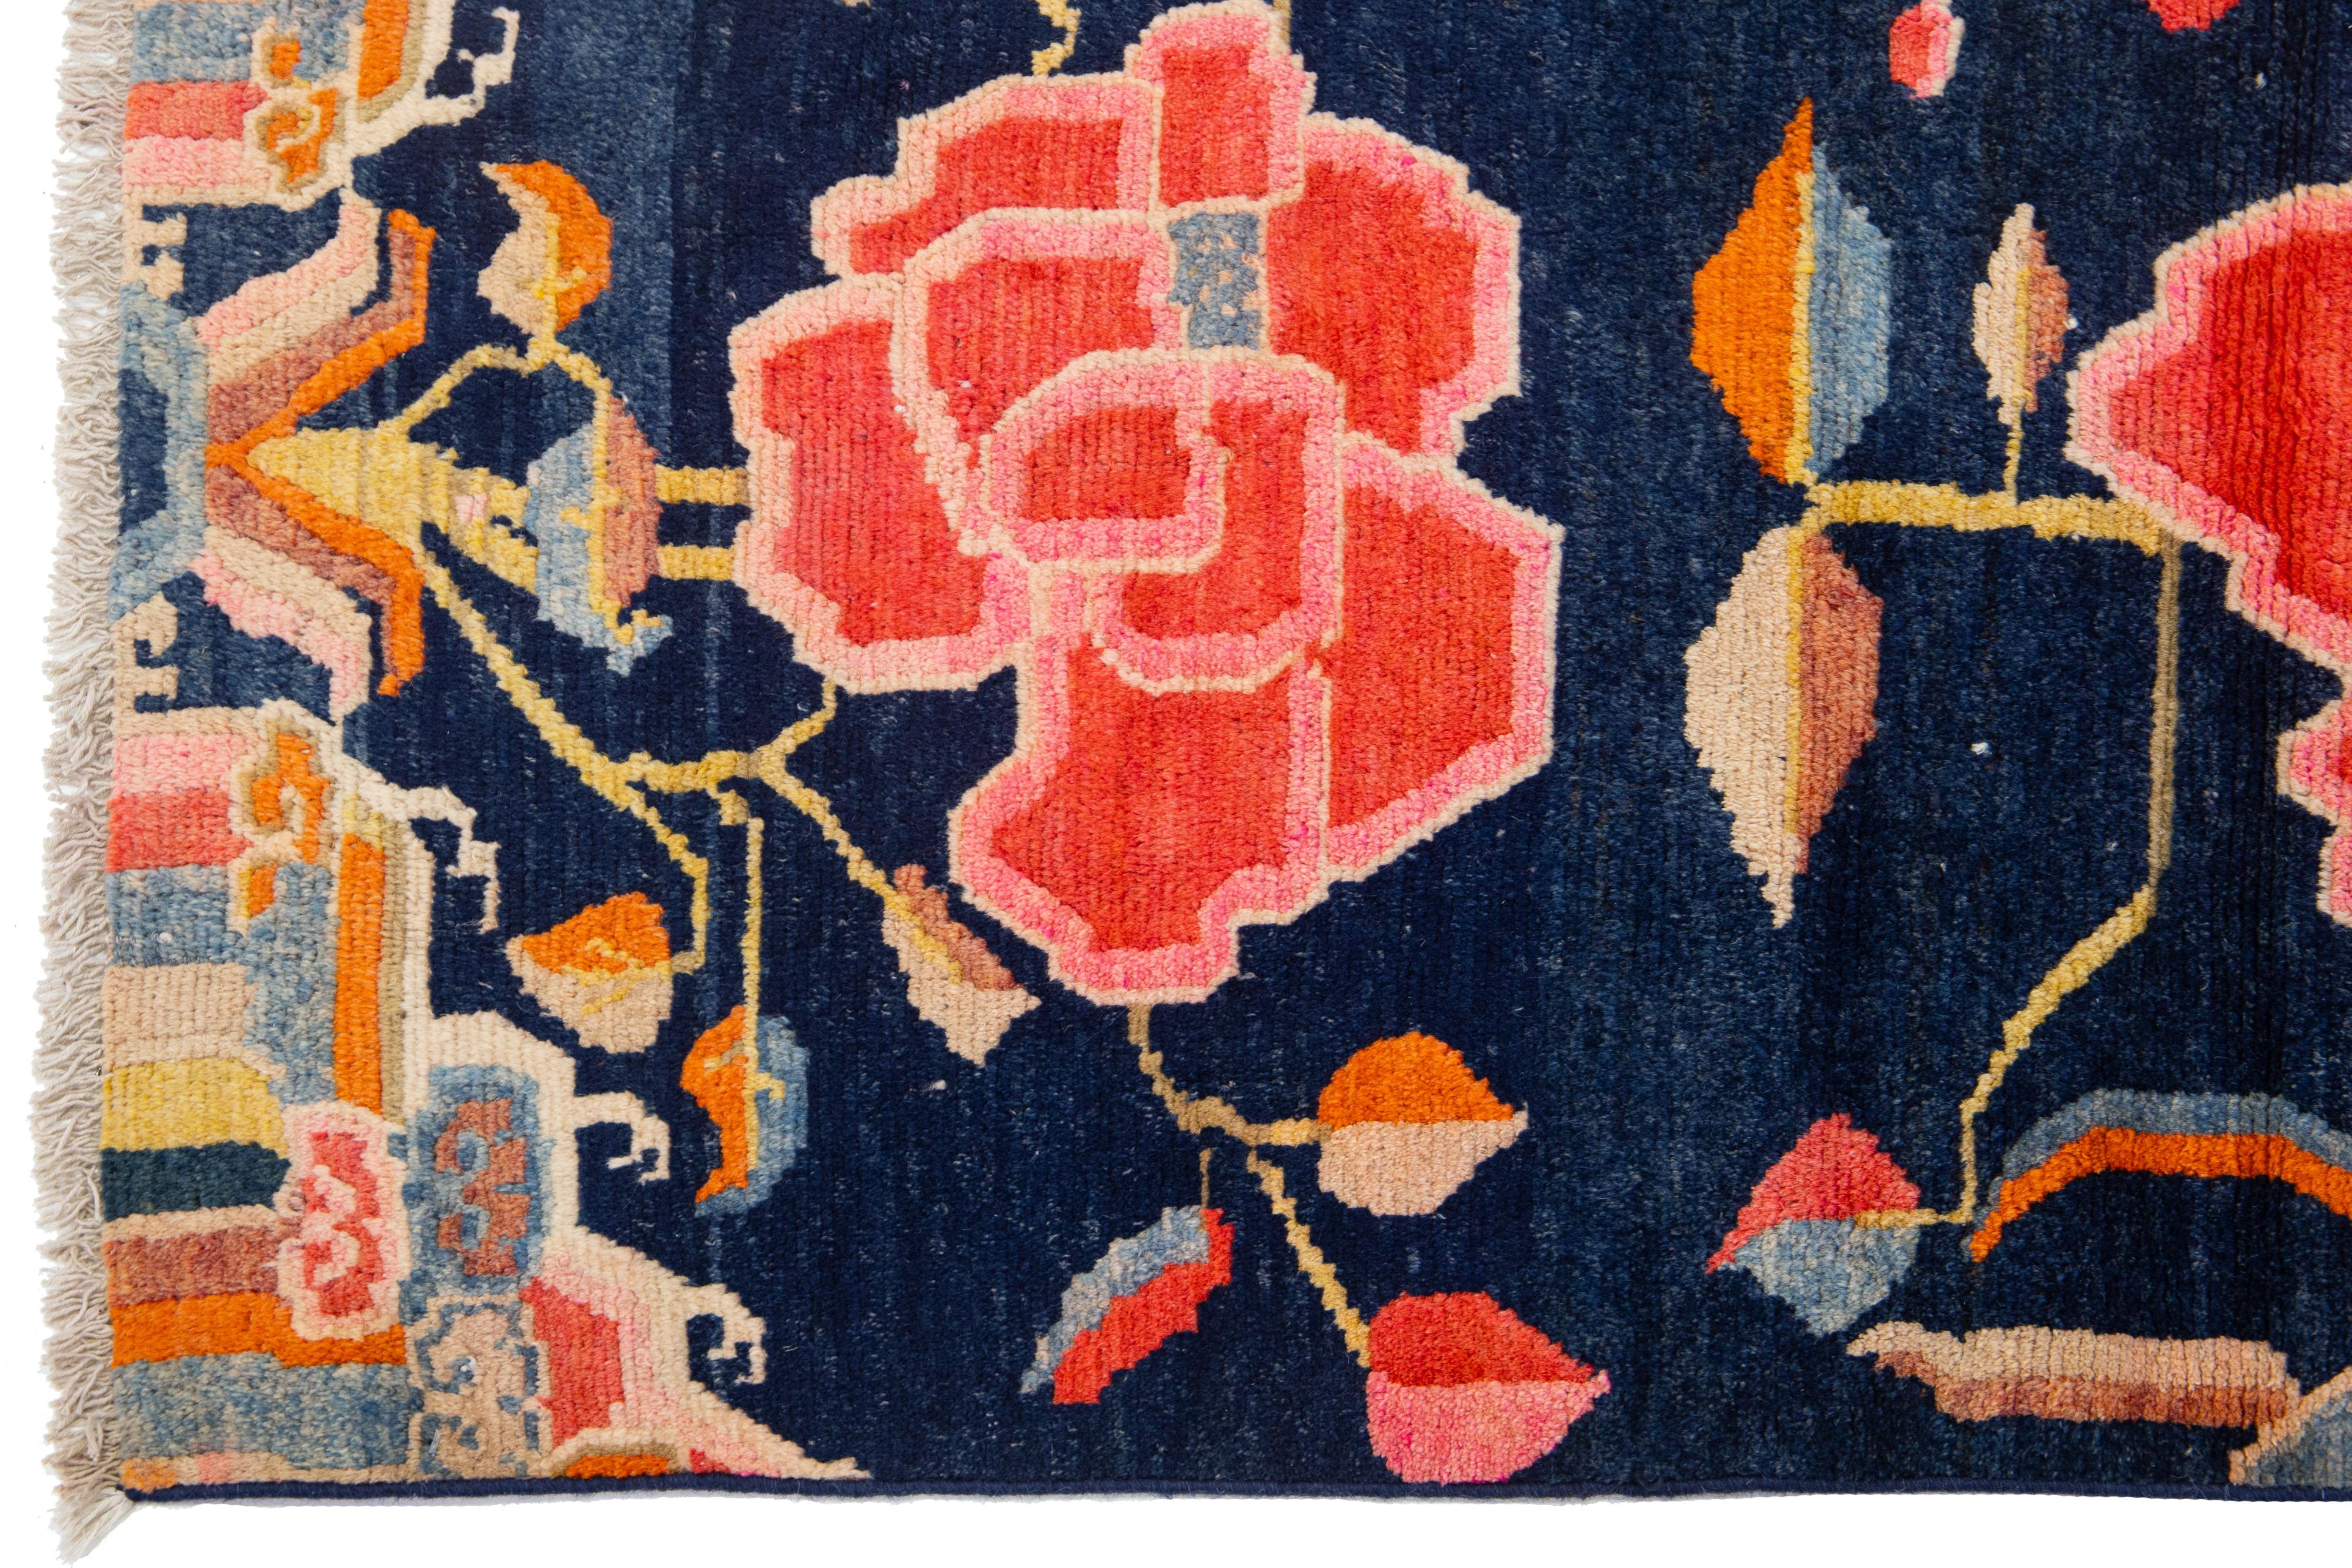 20th Century Art Deco Antique Chinese Wool Rug In Navy Blue with Floral Motif For Sale